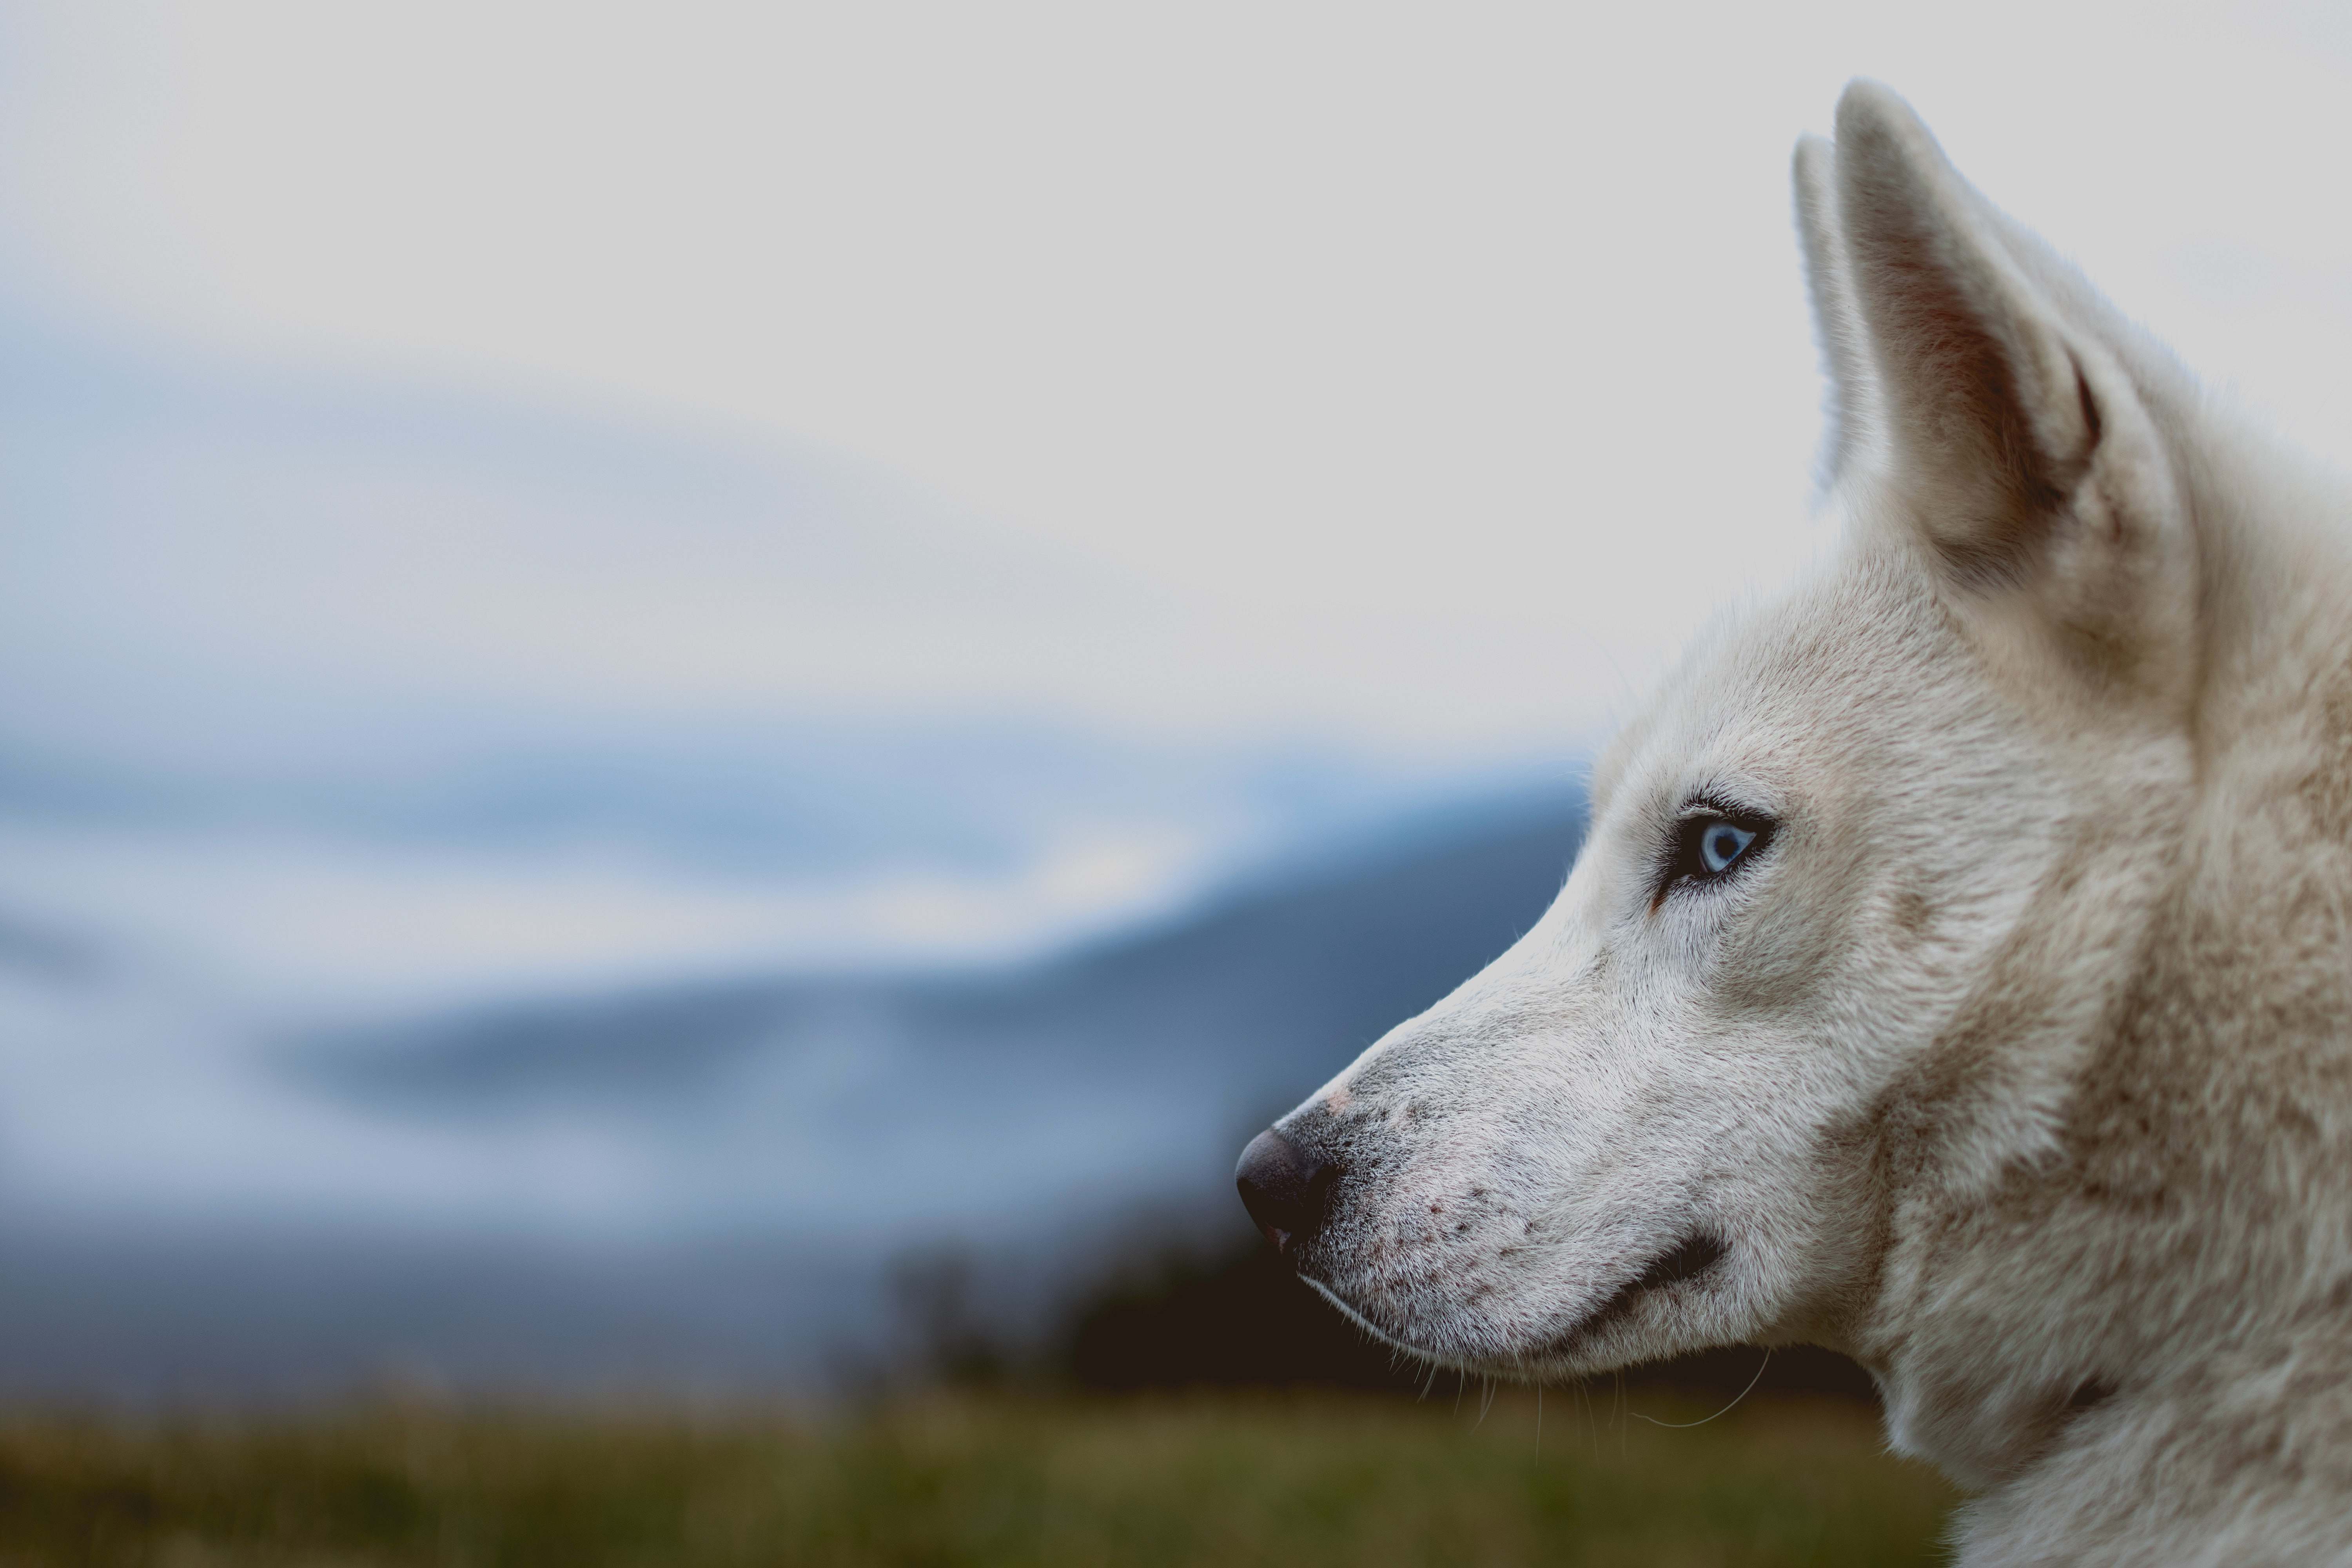 Dog White Wolf In Close-up Photography At Daytime Pet Image Free Photo